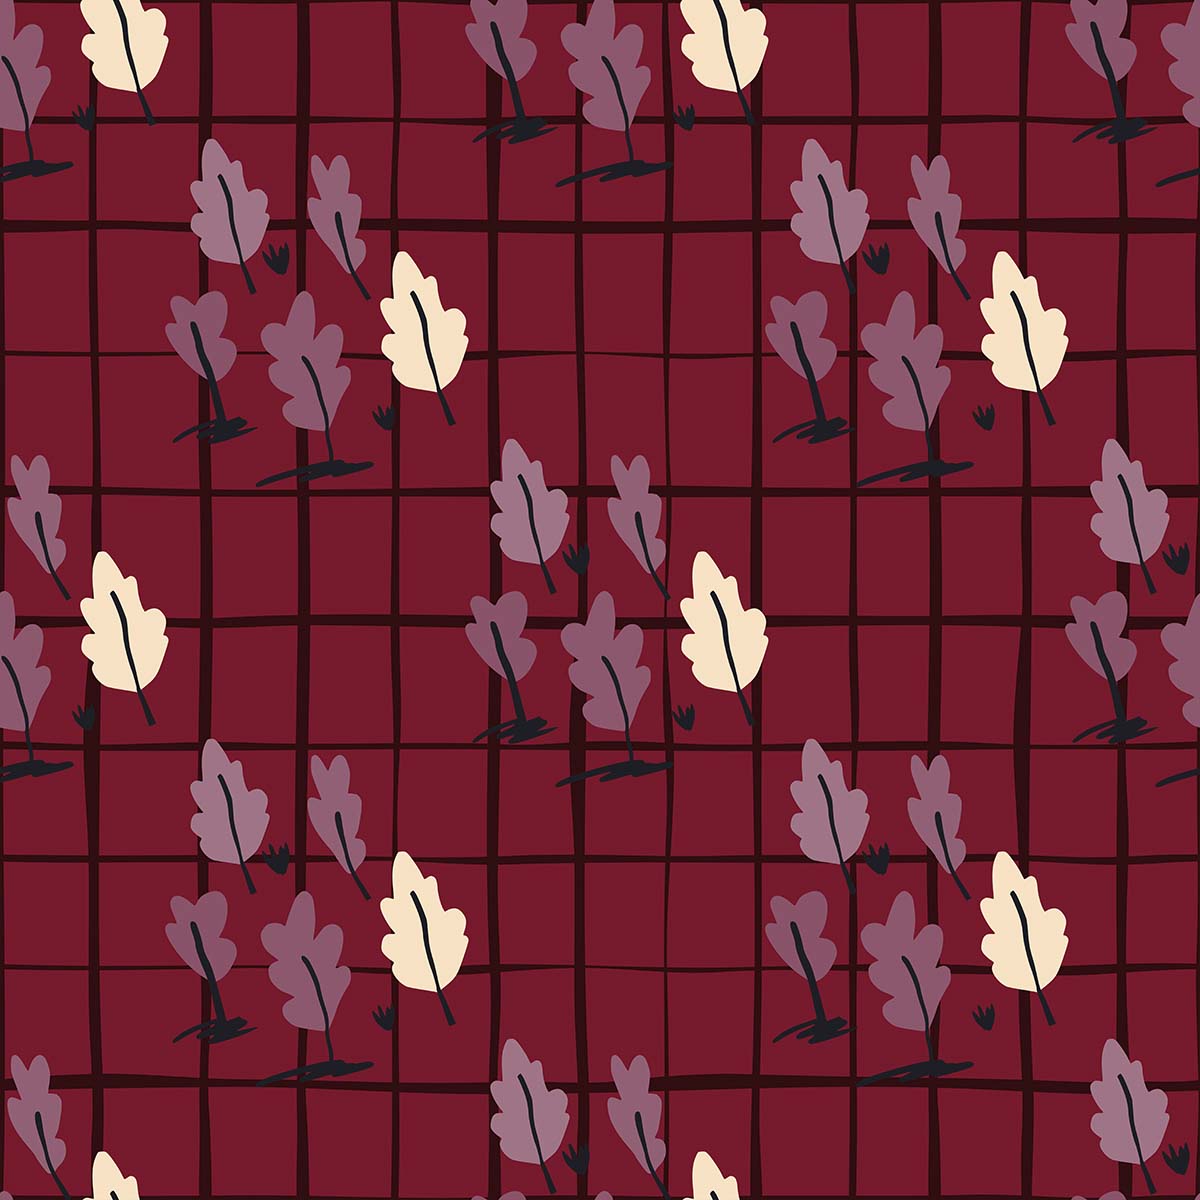 A pattern of leaves on a red background